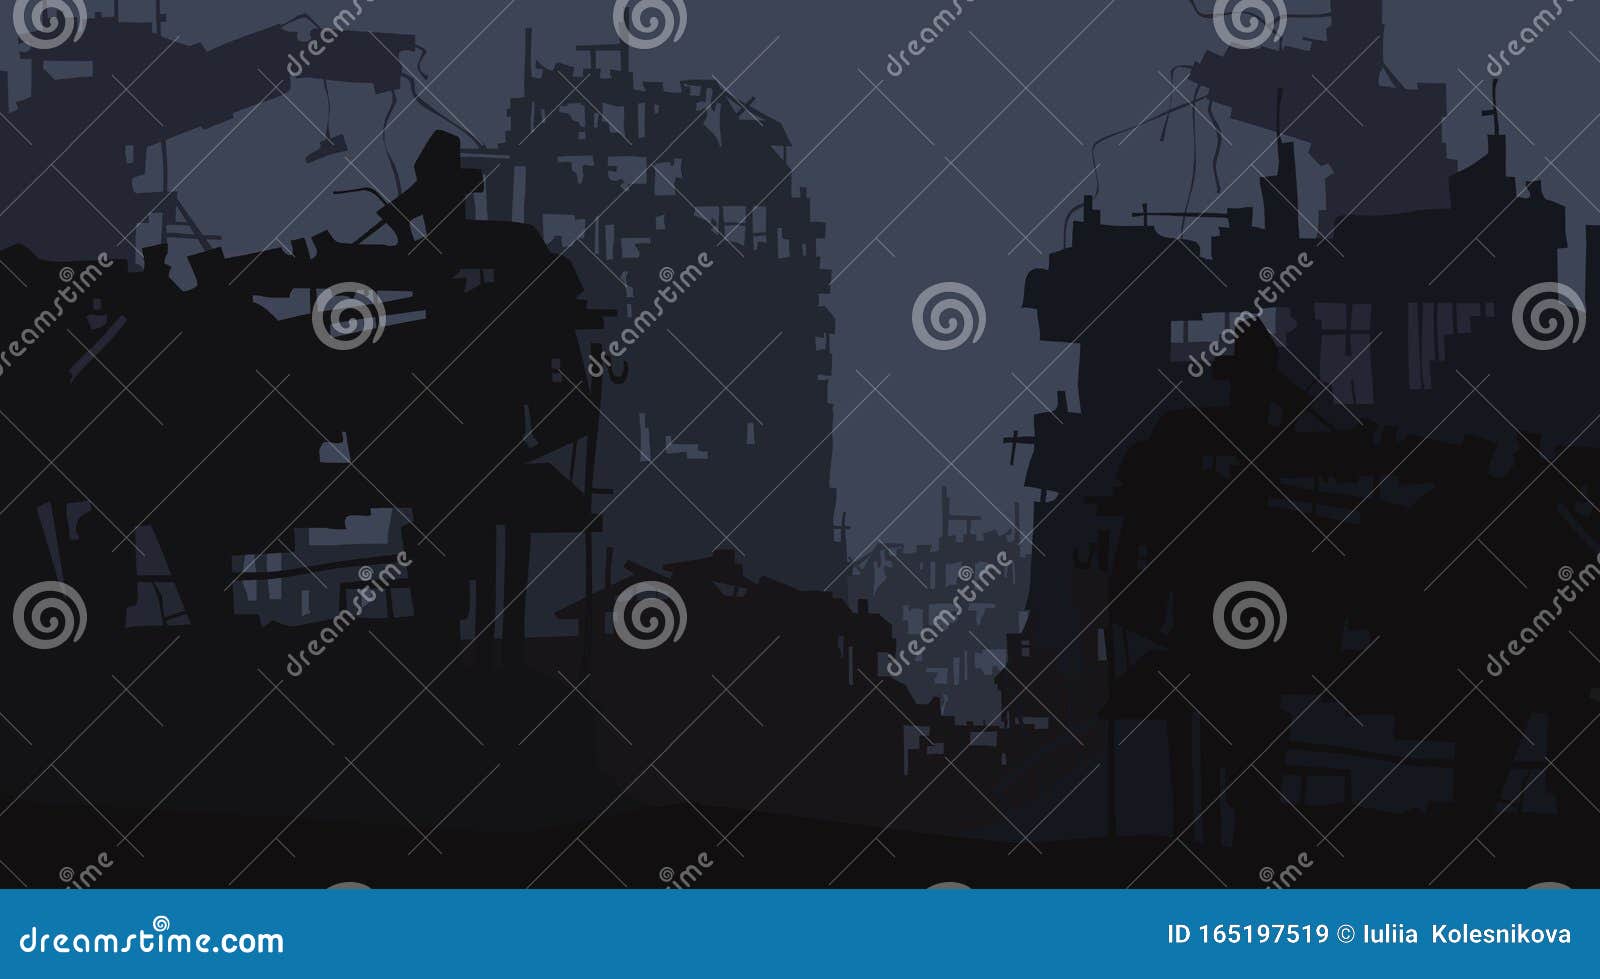 cartoon background of the ruins of the city of post apocalypse